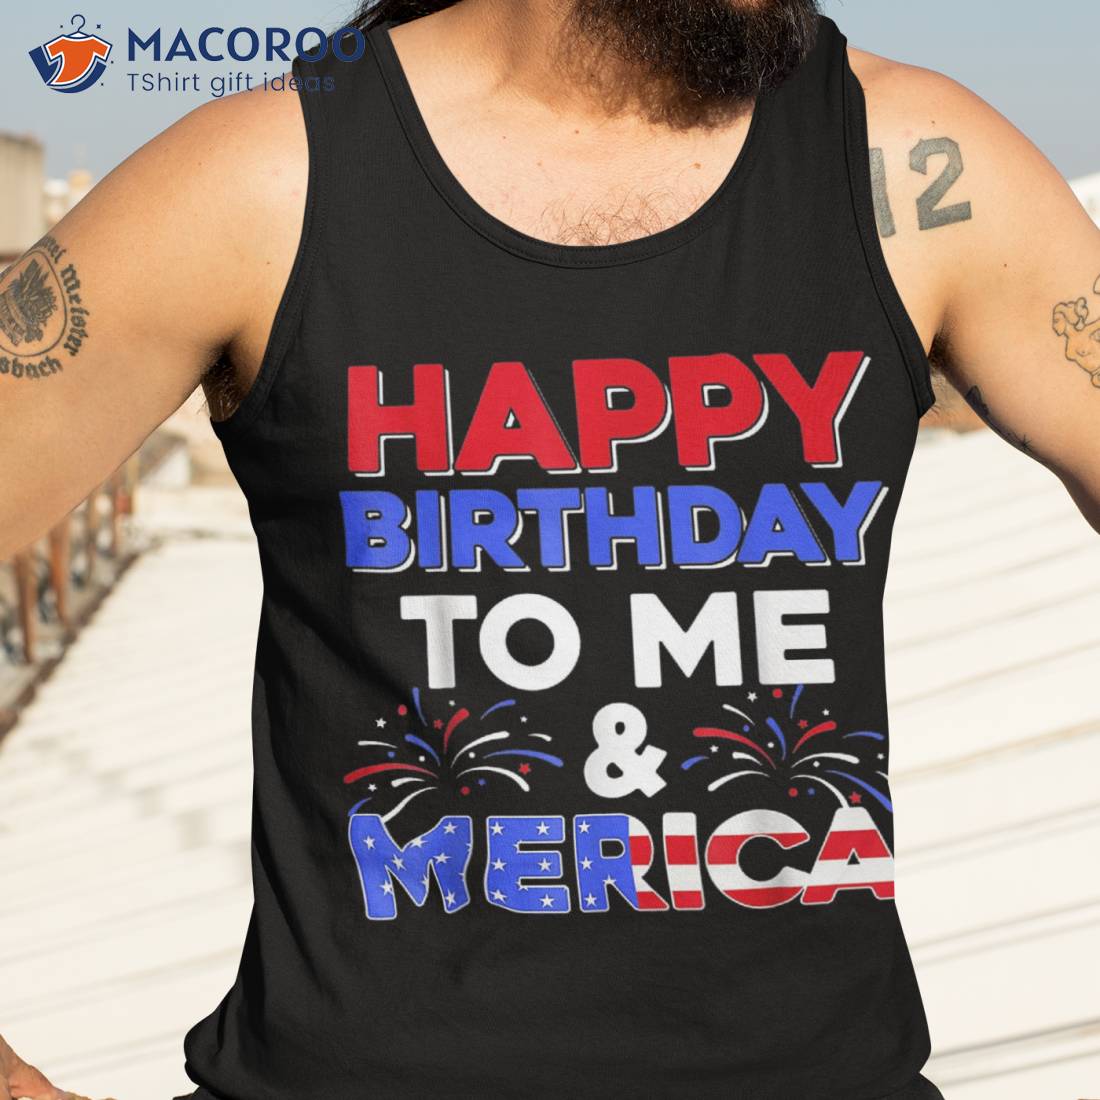 Happy 4th Of July Independence America' Unisex Baseball T-Shirt